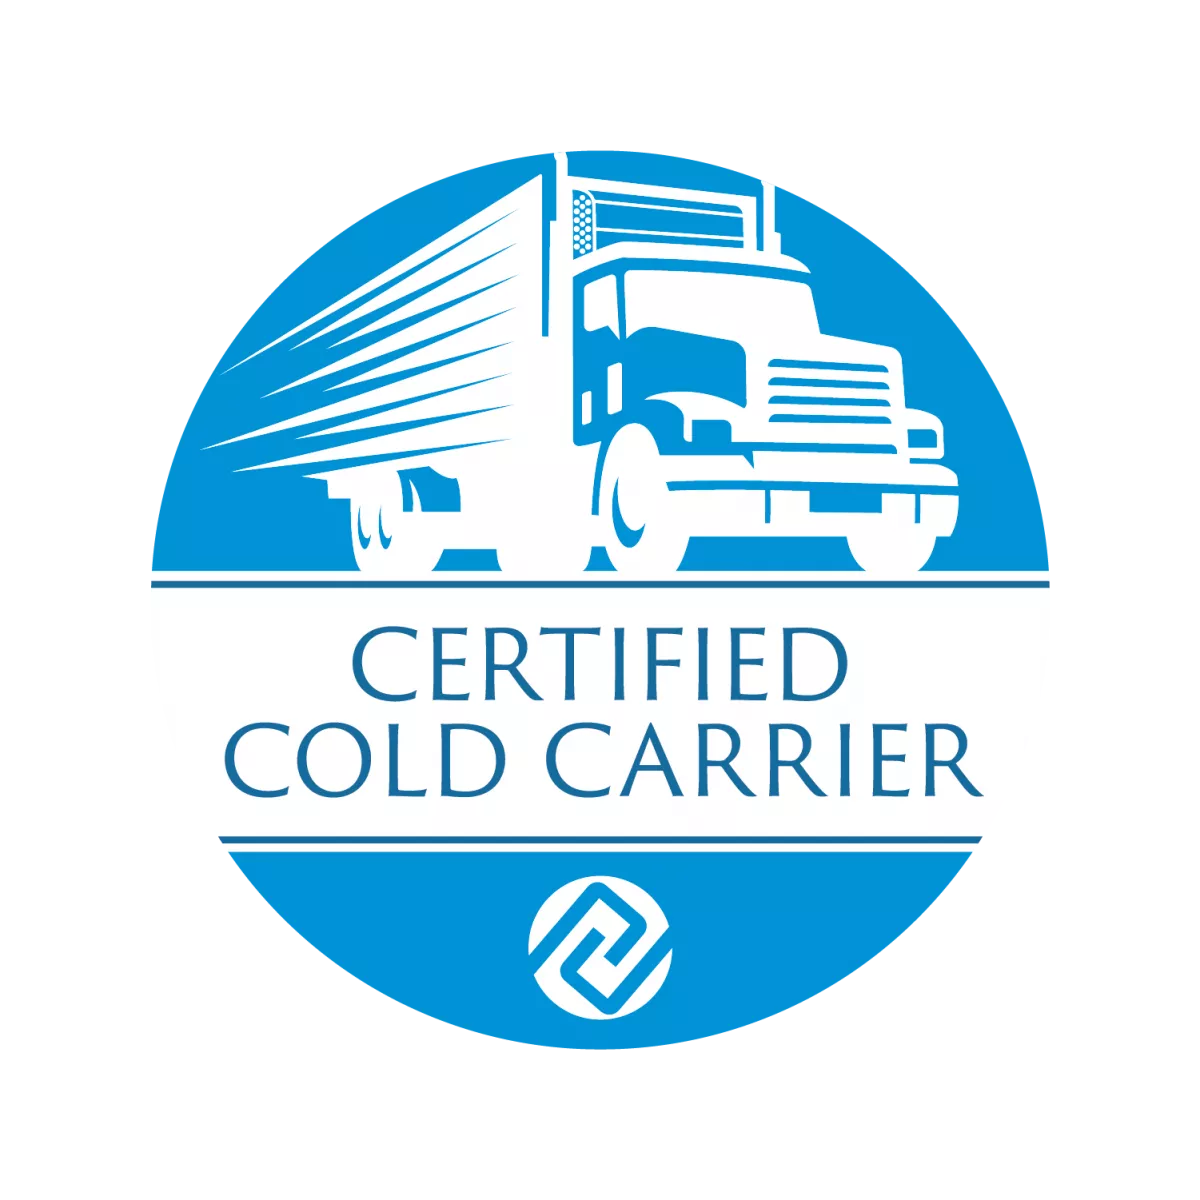 IRTA Launches New Cold Carrier Certification